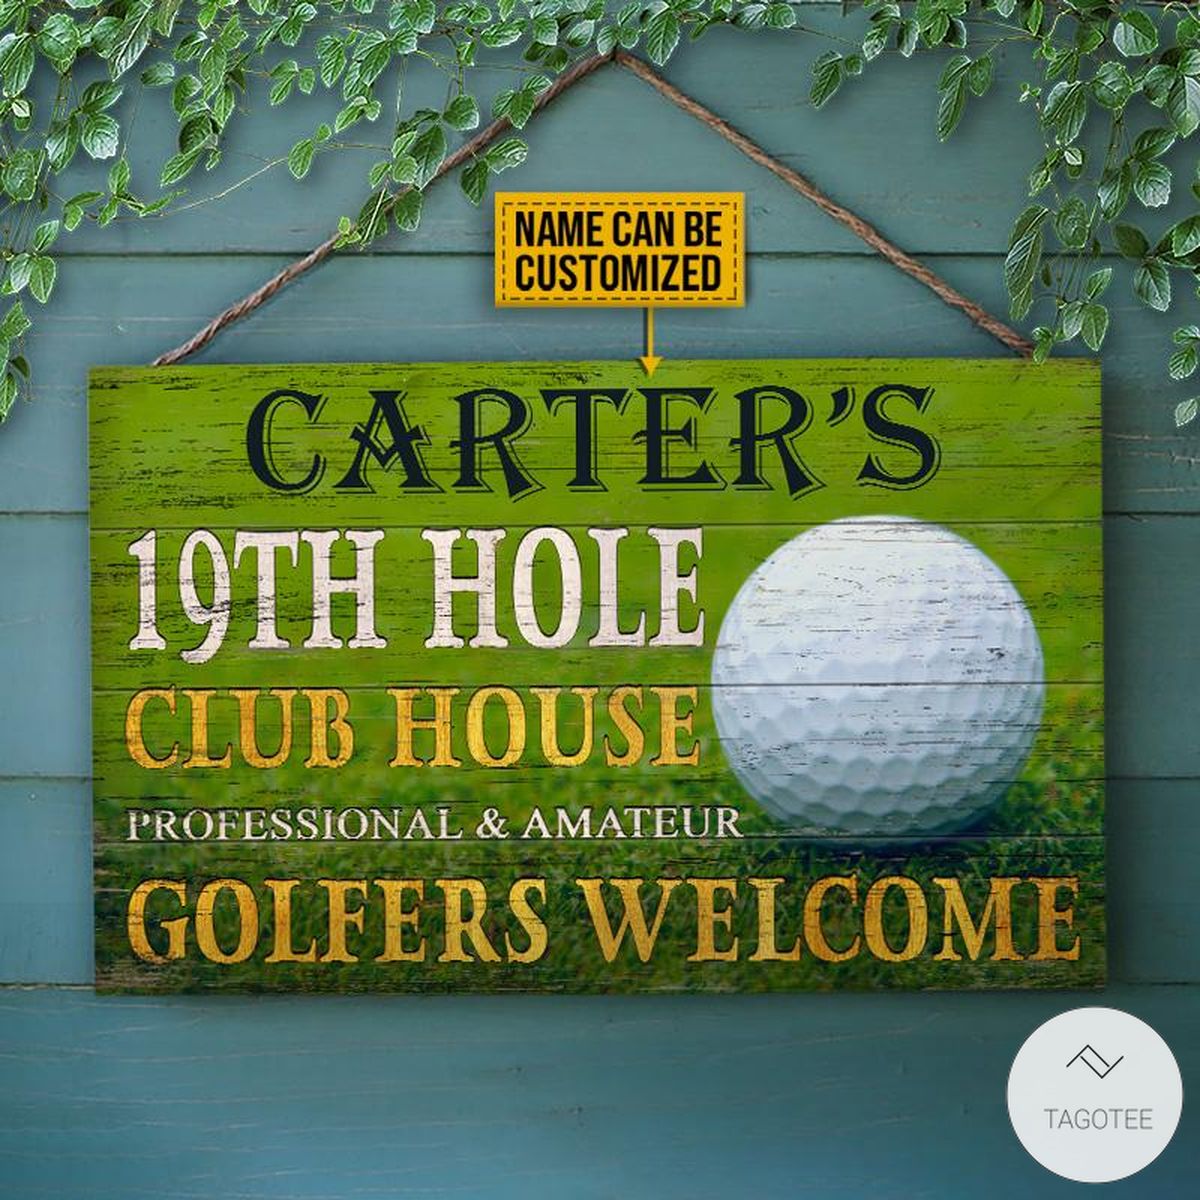 Personalized-Golf-19th-Hole-Club-House-Golfers-Welcome-Rectangle-Wood-Sign-x